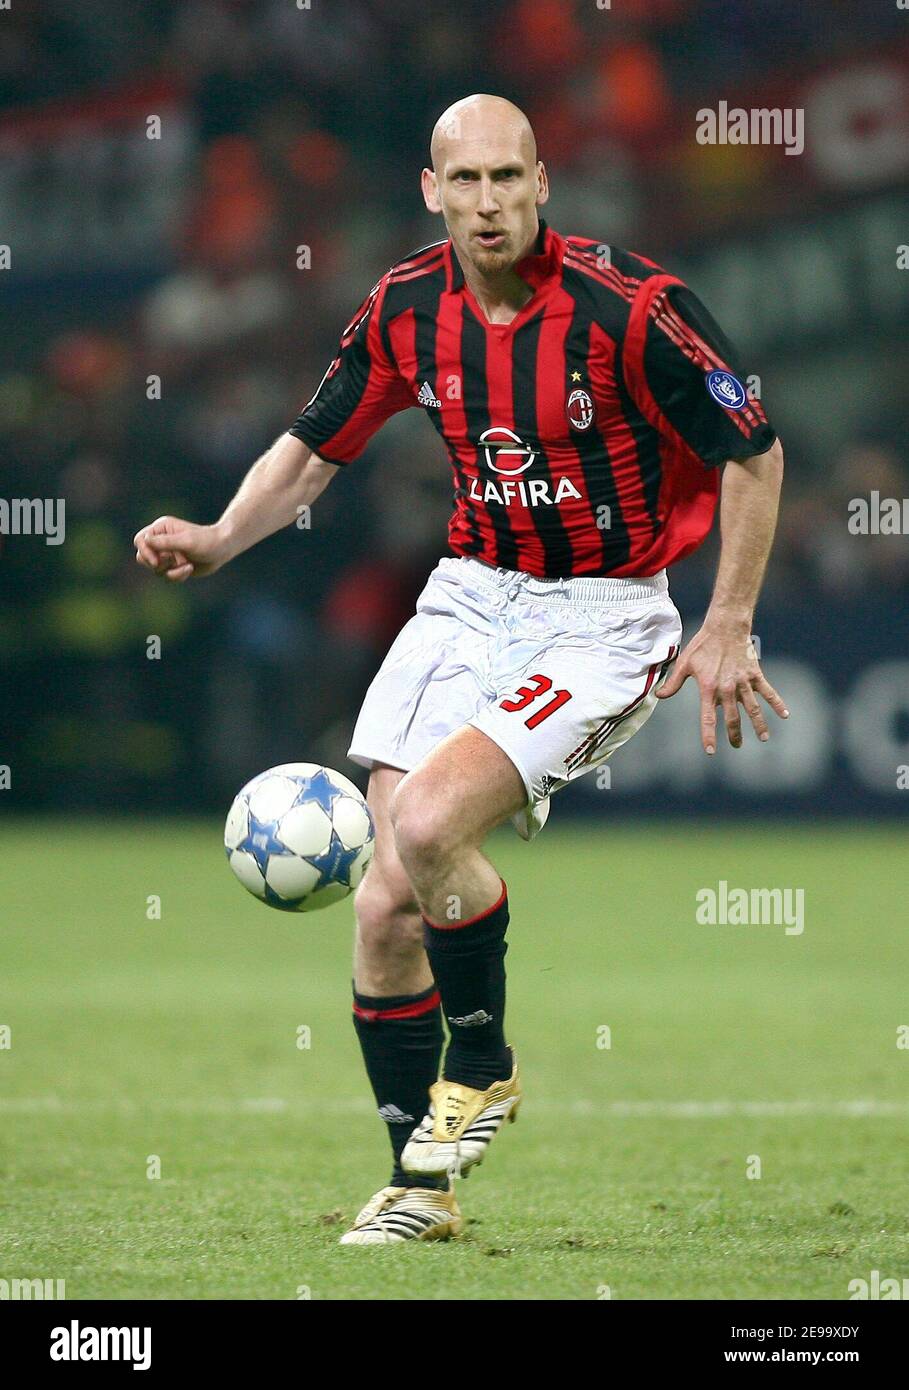 AC Milan's Jaap Stam in action during the UEFA Champions League First Leg, AC Milan vs Barcelona in Milan, Italy, on April 18, 2006. Barcelona won 1-0. Photo by Christian